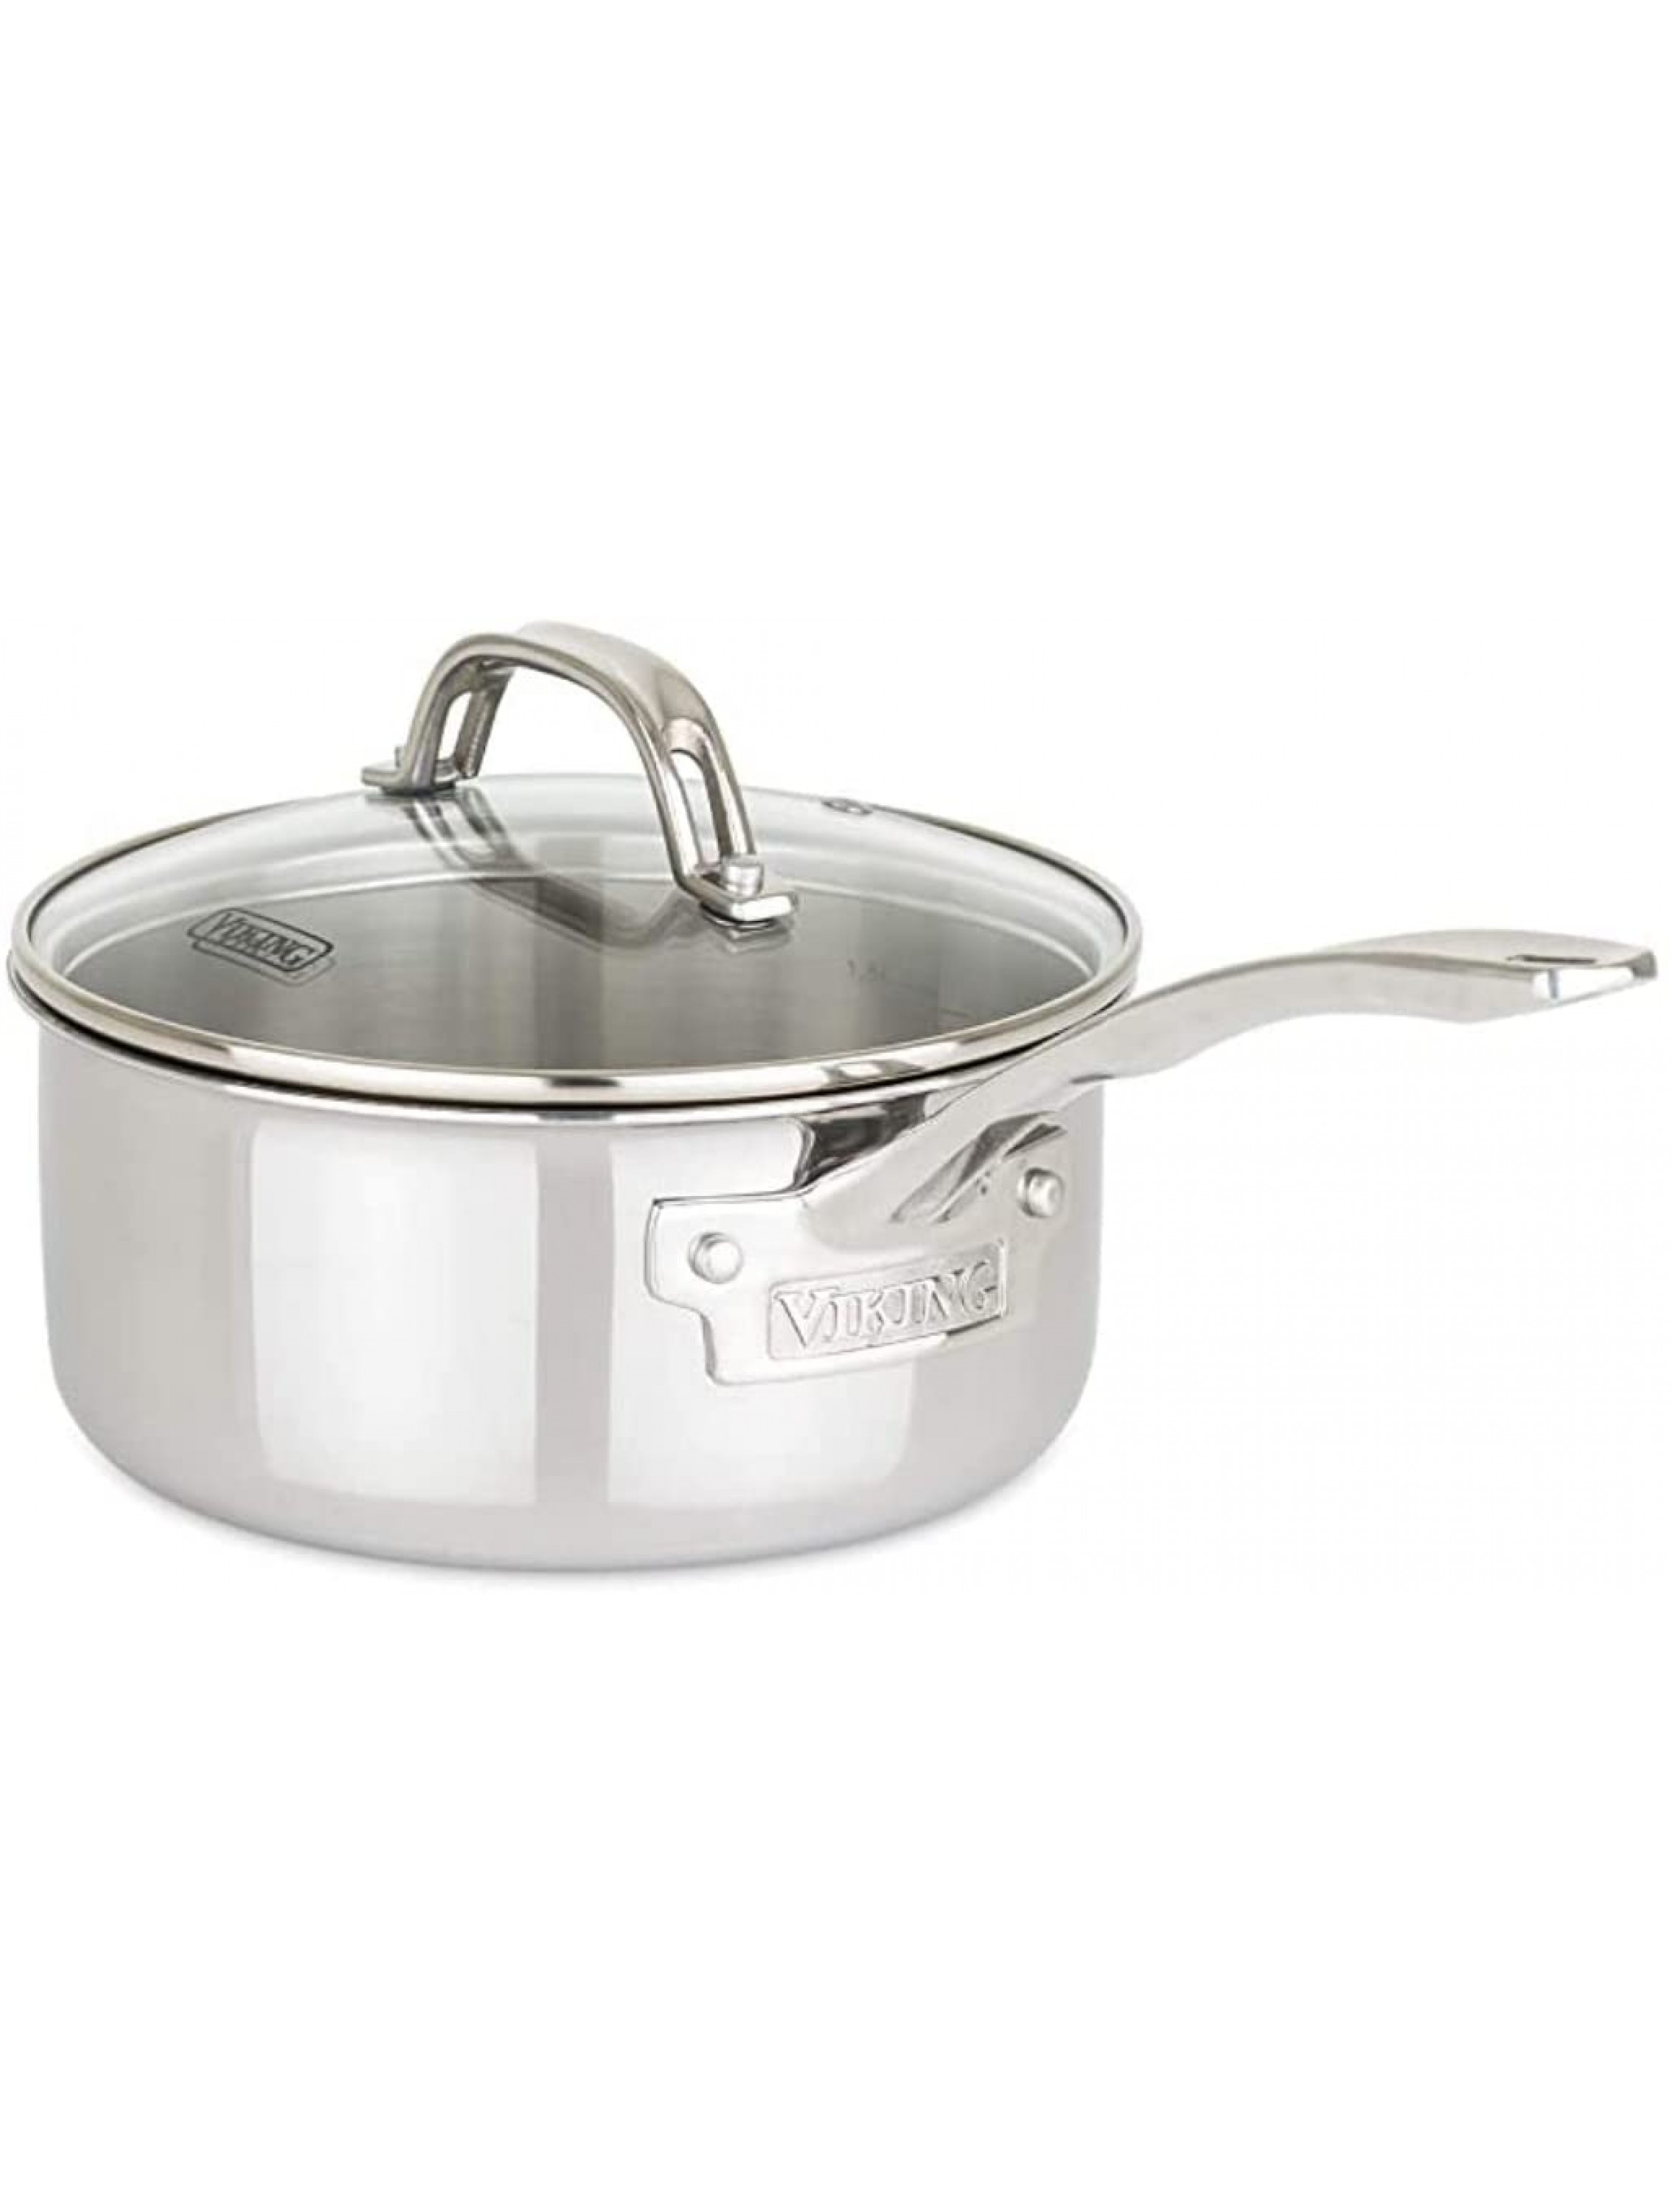 Viking 3-Ply Stainless Steel Sauce Pan with Glass Lid 1.5 Quart - BQVZXLNNW